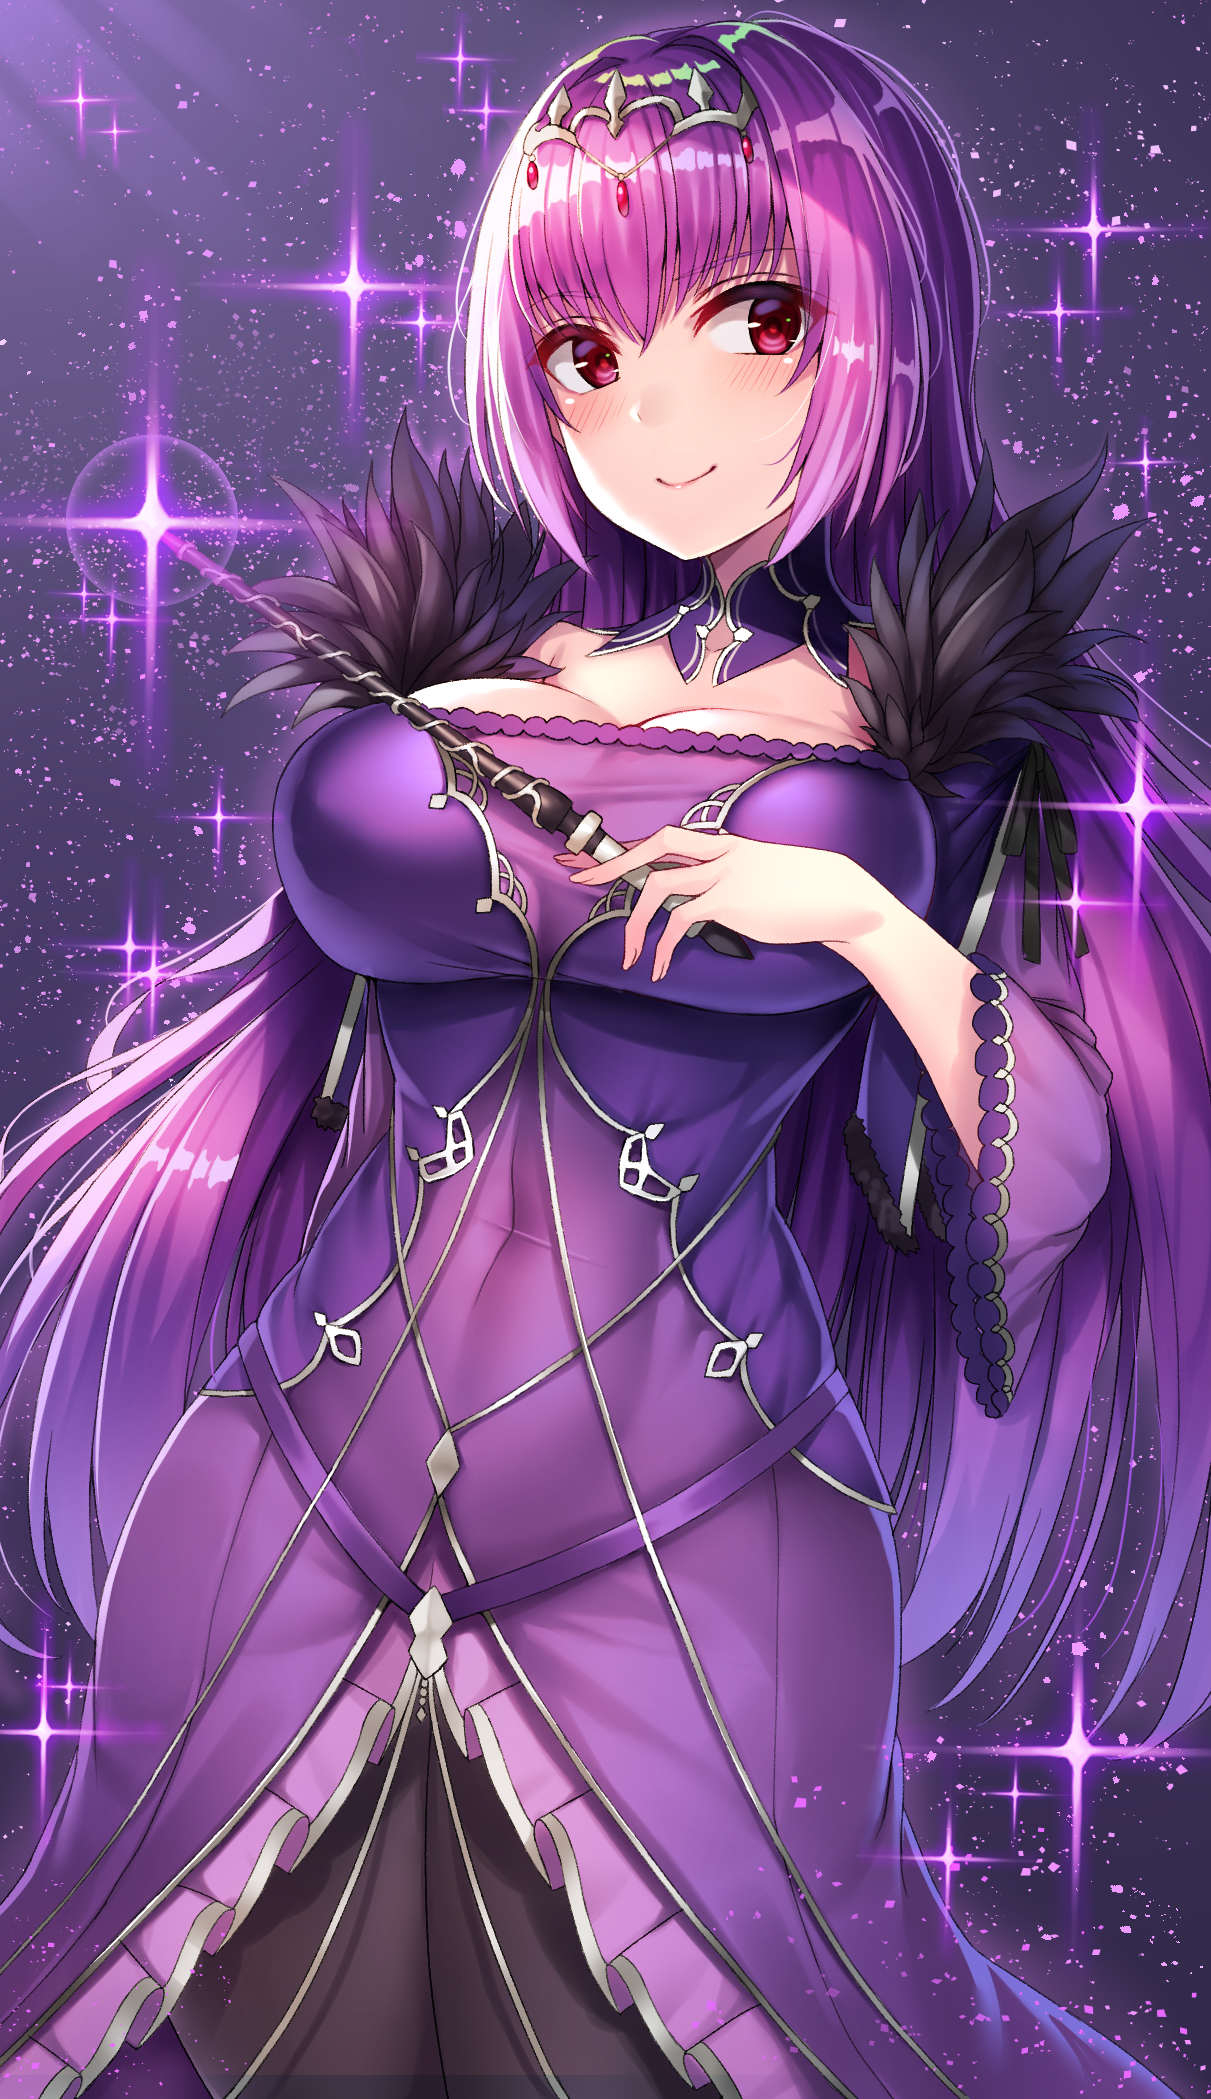 Anime 1211x2099 artwork Syoutamho Fate series Scathach anime girls dress